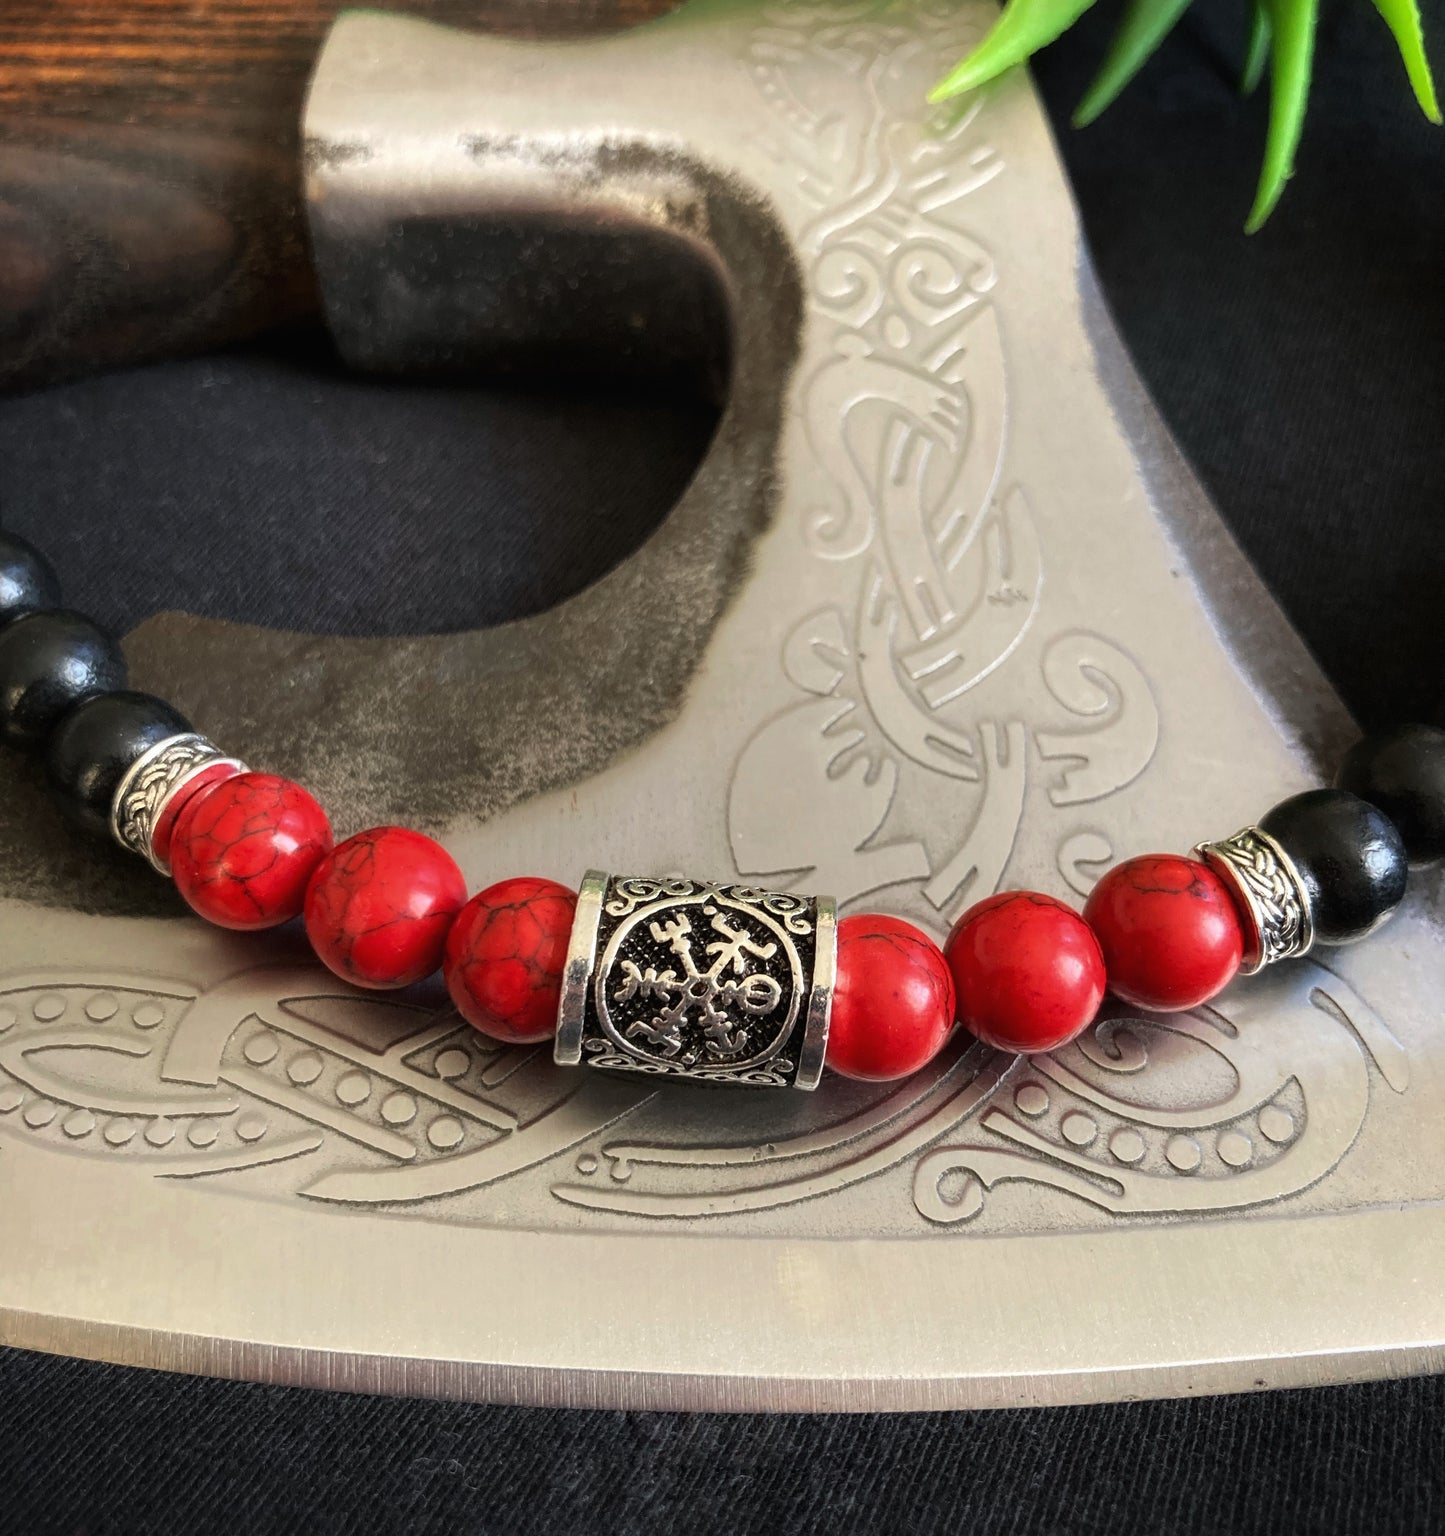 Upon a axe blade sits a small section of a beaded necklace. You can see in detail the metal rune with its viking compass design on it. Either side of this are red shiny beads that have a darker colour running through them.